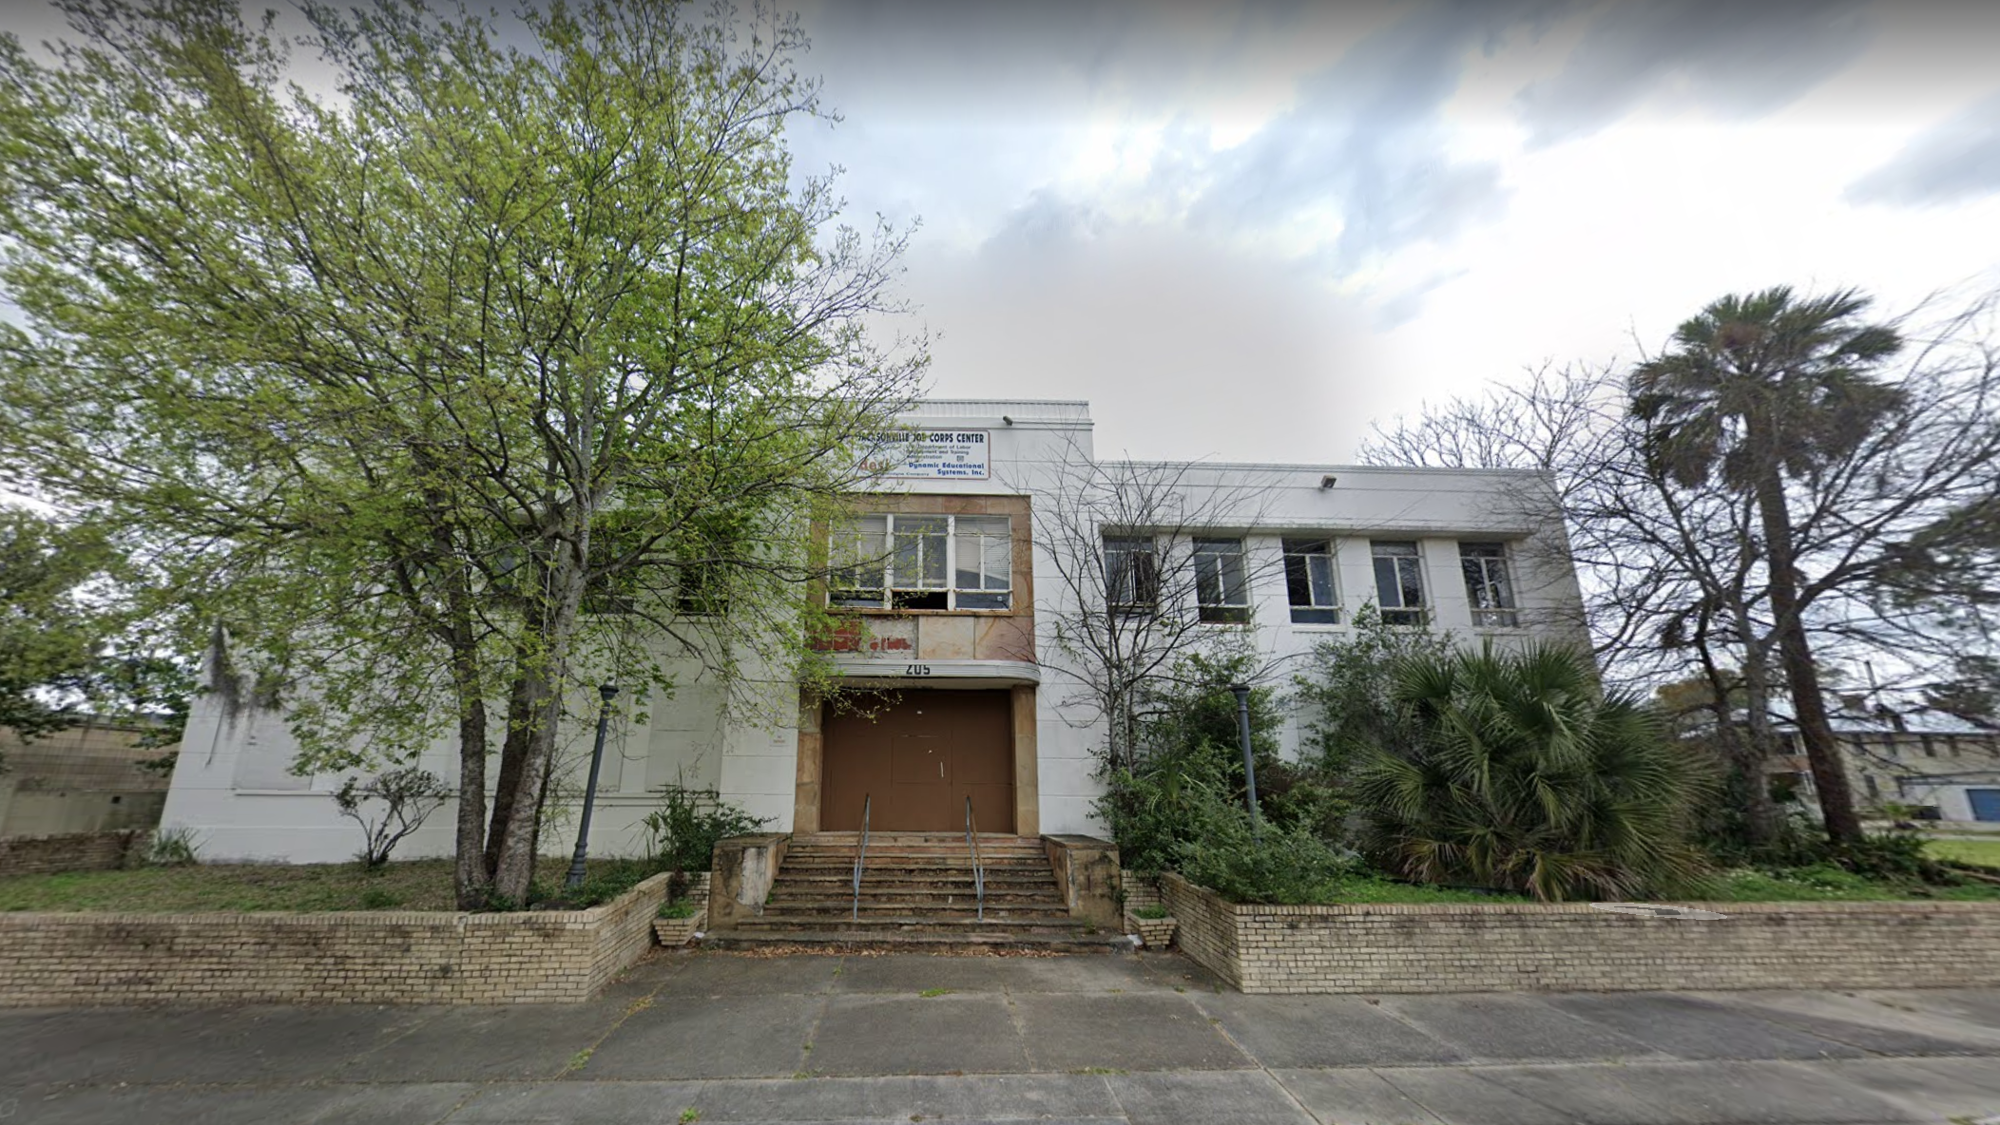 A developer plans to transform the former Jacksonville Jewish Center into apartments.